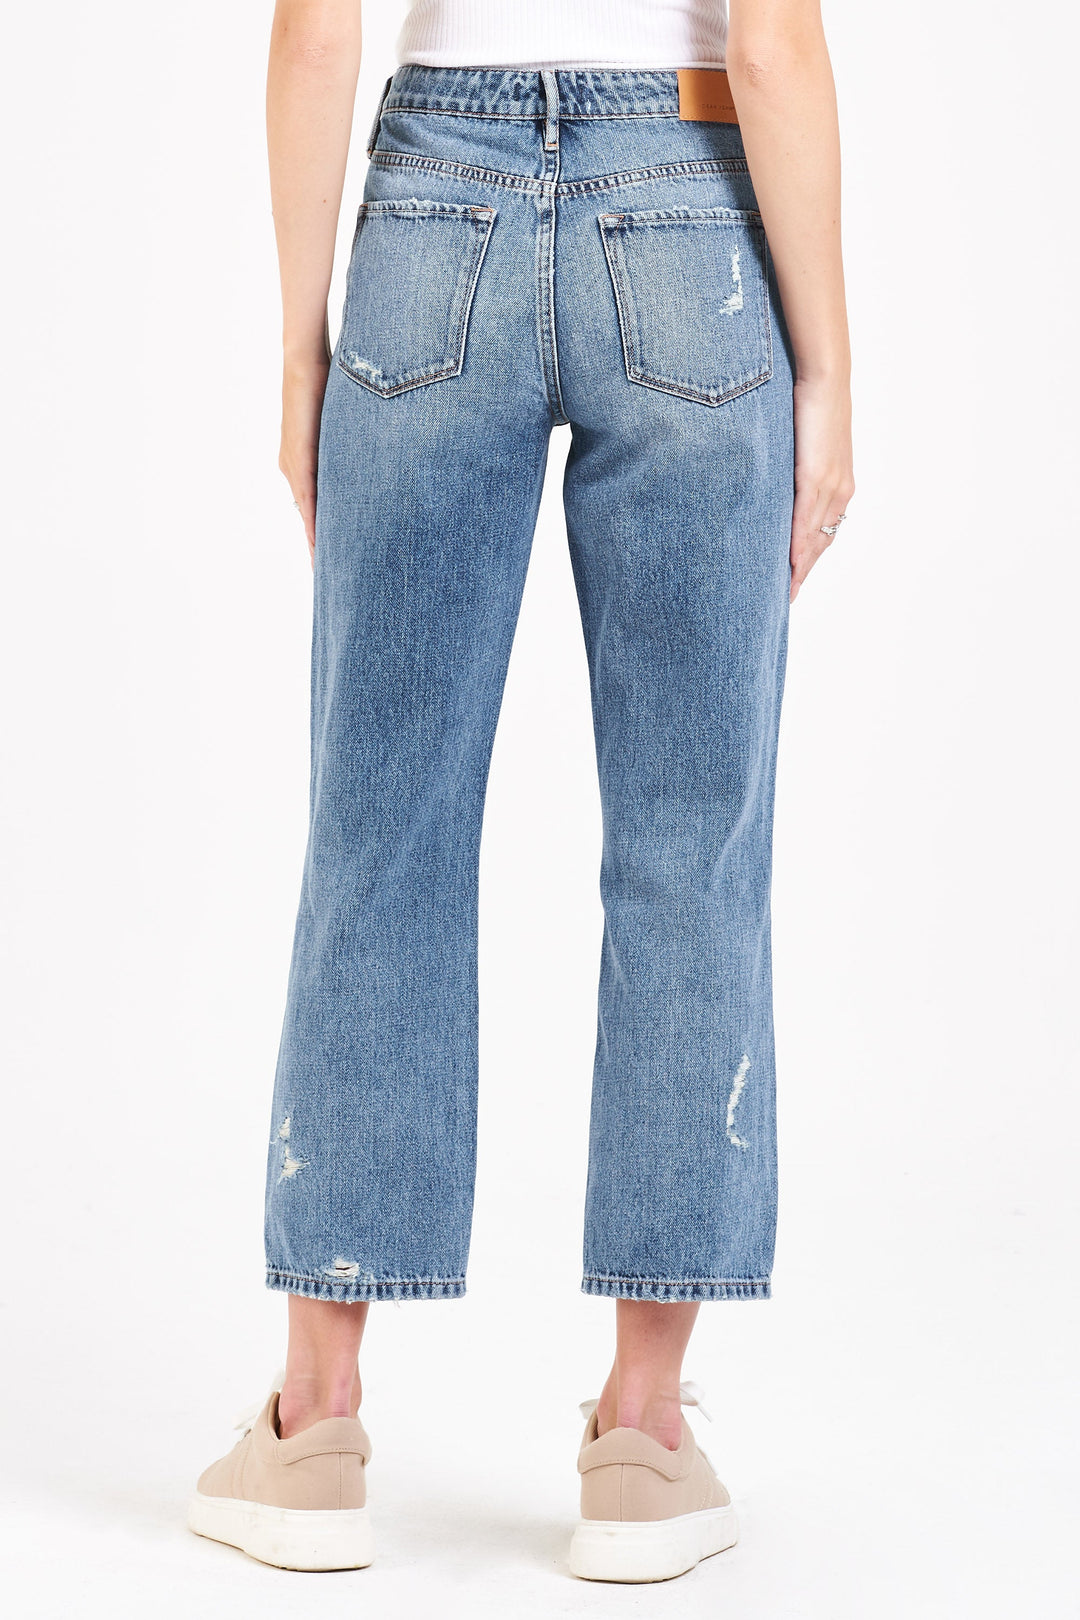 image of a female model wearing a JODI SUPER HIGH RISE CROPPED STRAIGHT LEG JEANS ELM GROVE JEANS